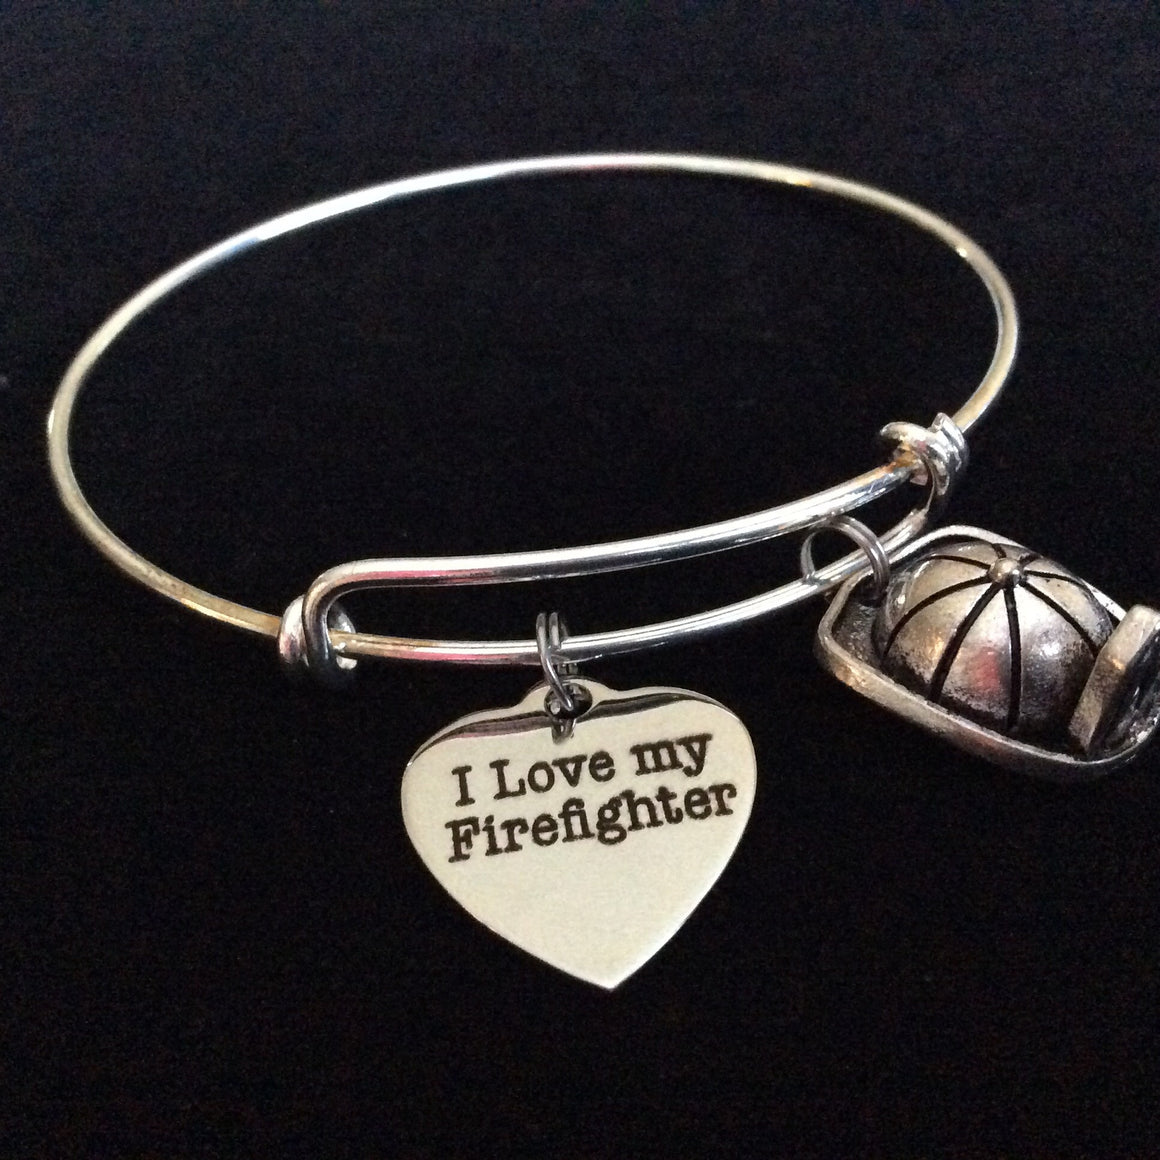 I Love My Fireman on Expandable Adjustable Wire Bangle Bracelet Occupational Fire Hat Fire Department Wife Gift